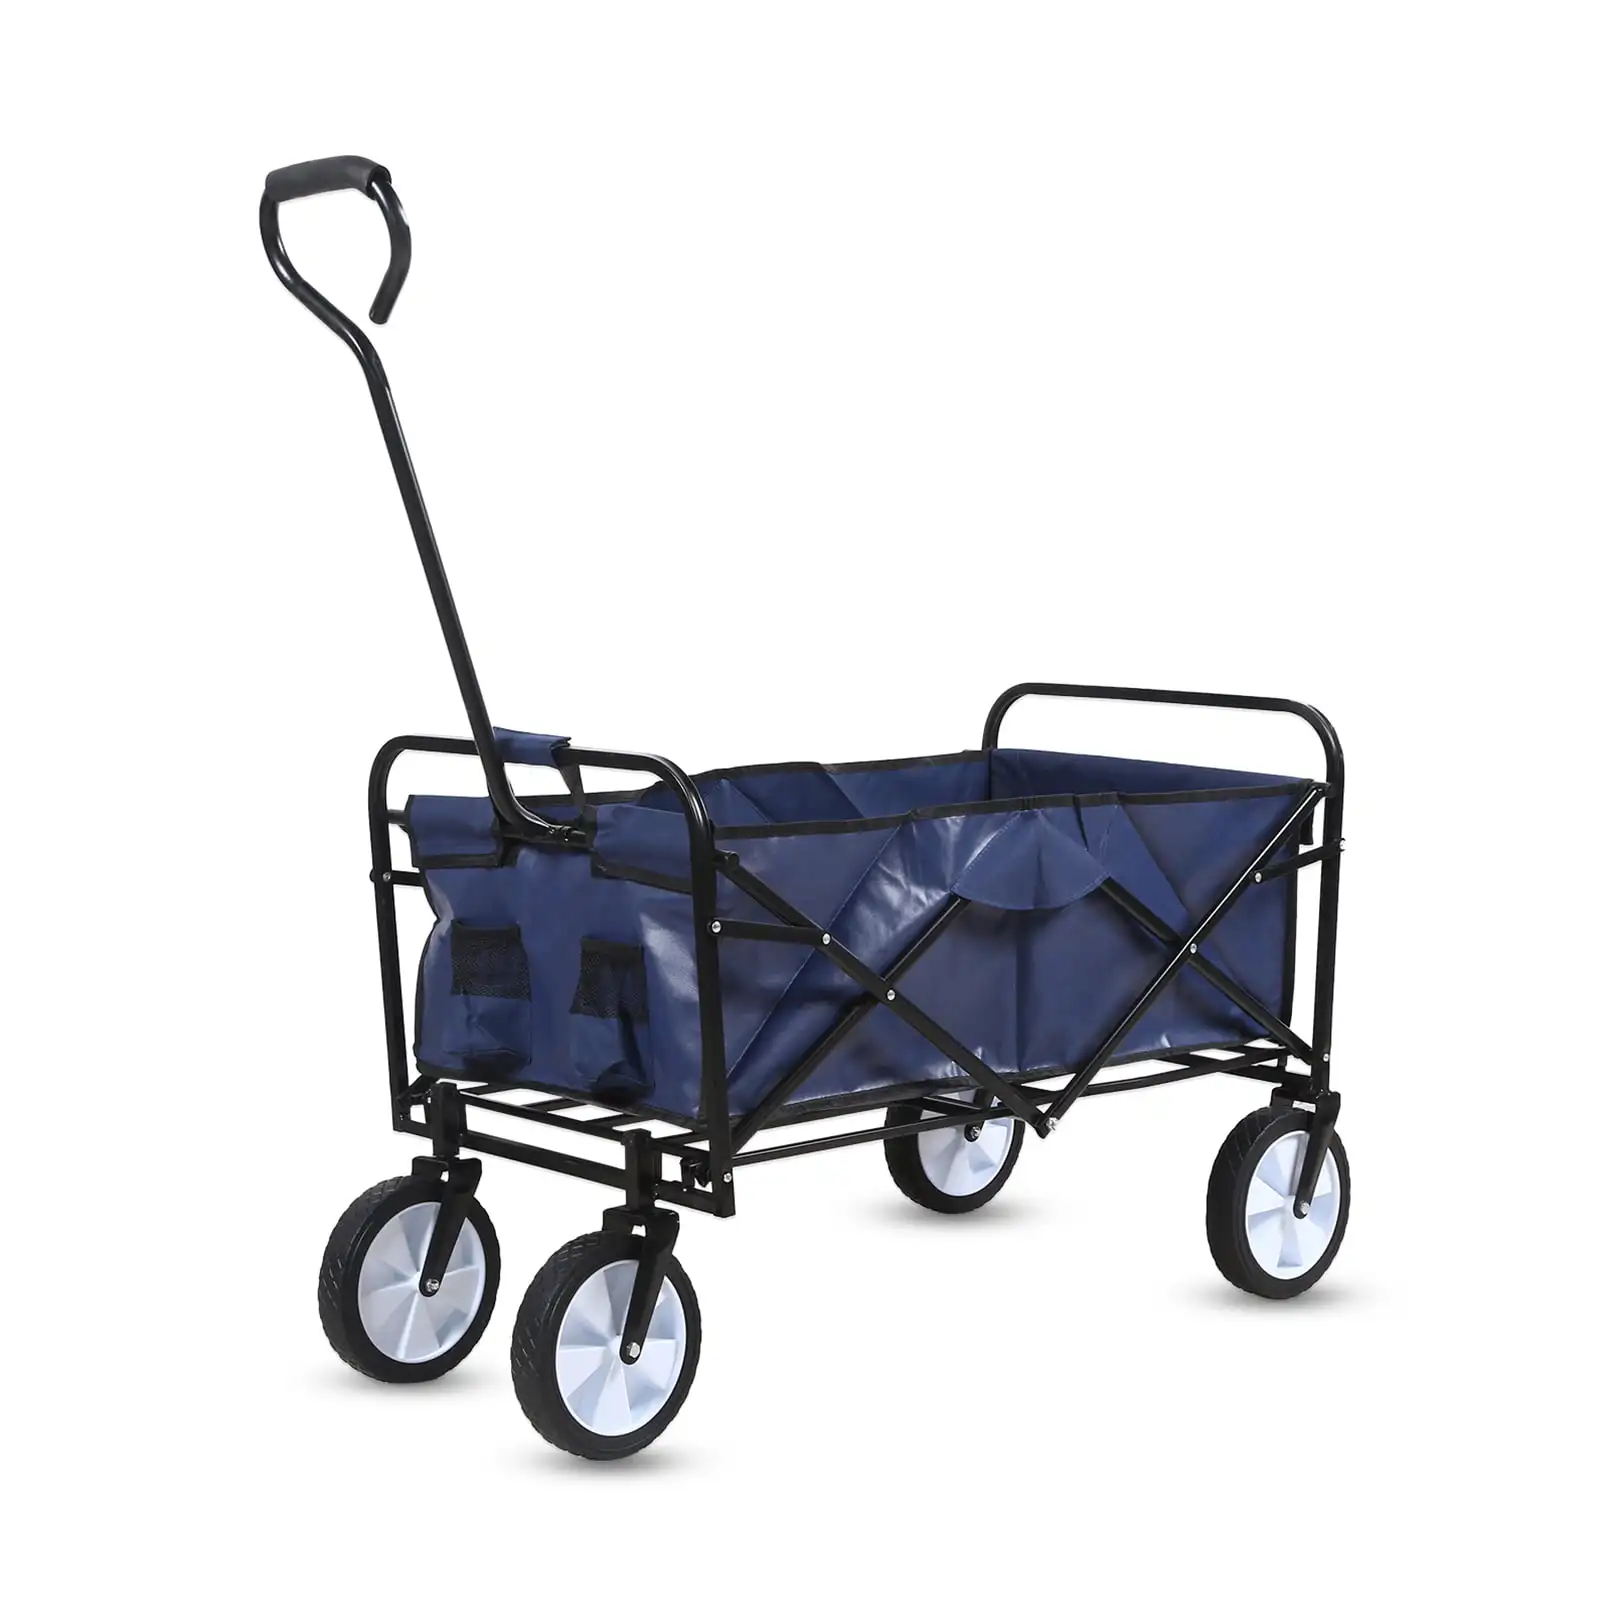 Folding Wagon Cart, Convenient Collapsible Outdoor Wagon